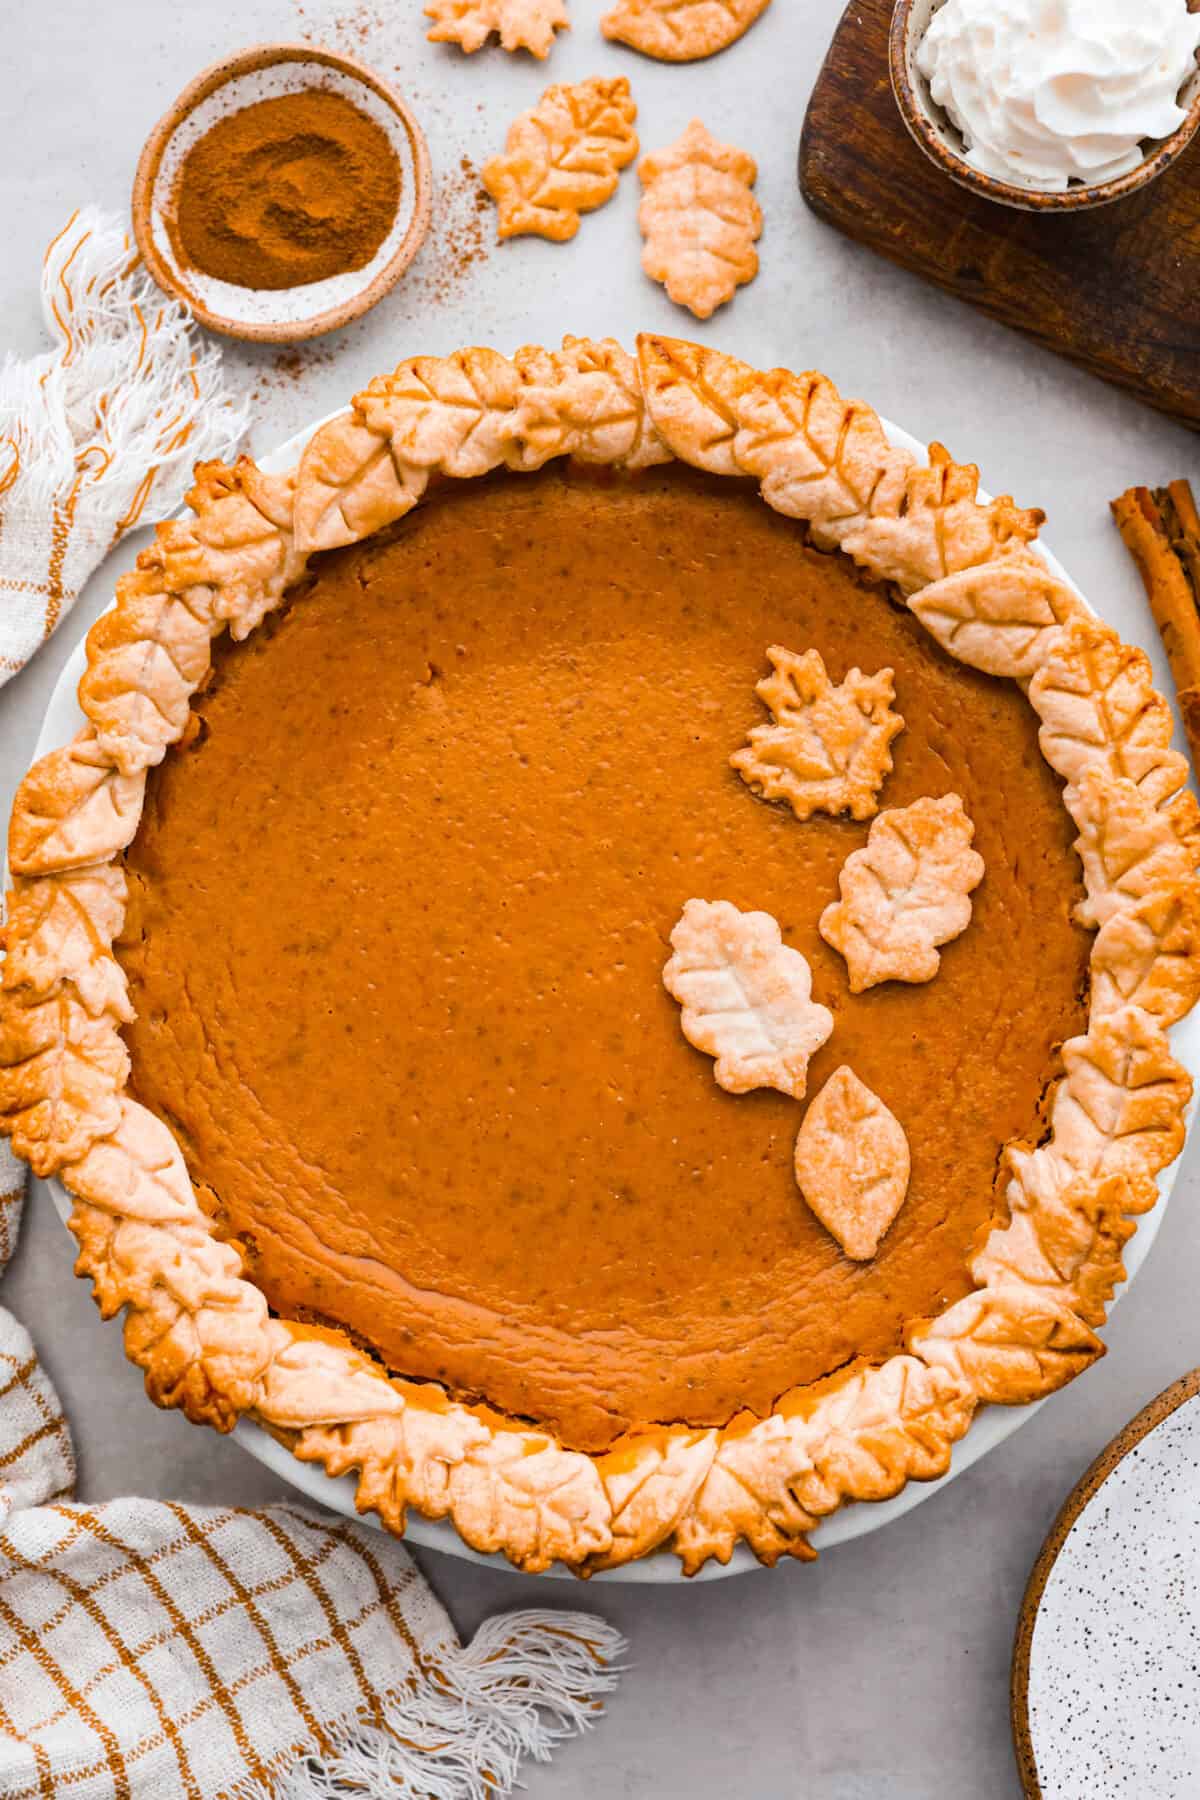 A baked pie, topped with pieces of crust that look like leaves.